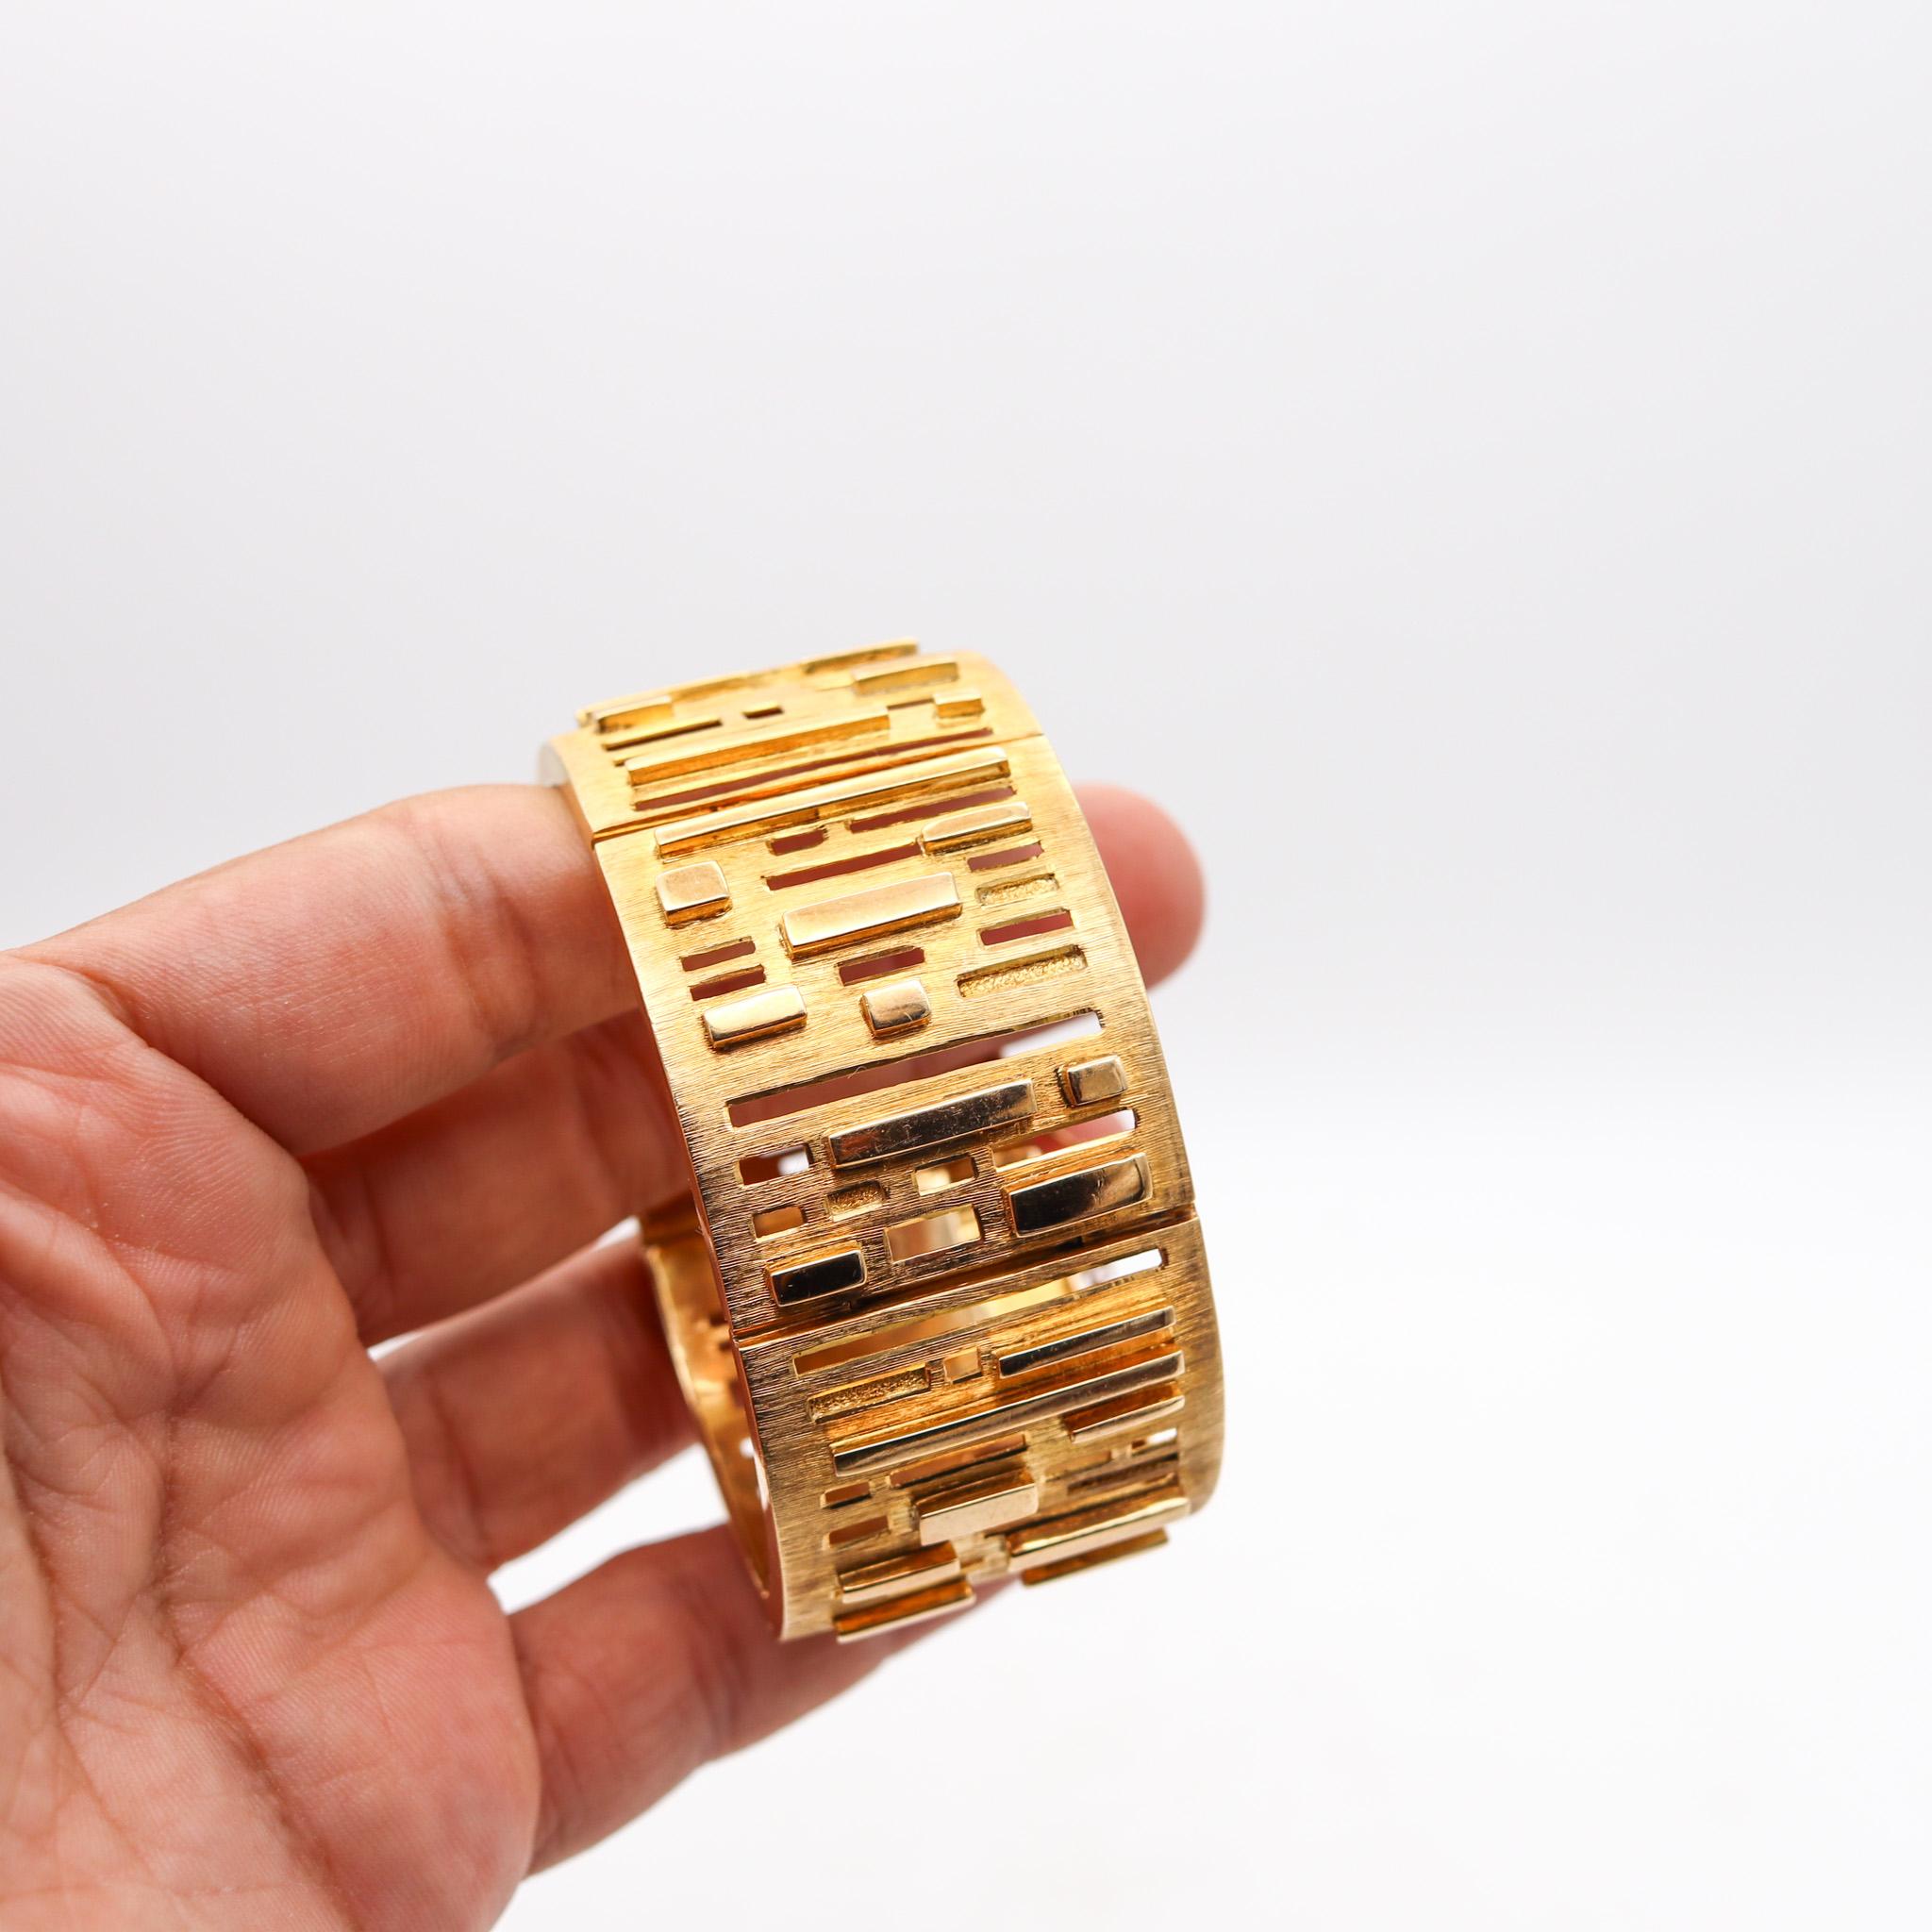 Burle Marx 1970 Geometric Concretism Art Bracelet In Solid 18Kt Yellow Gold 2